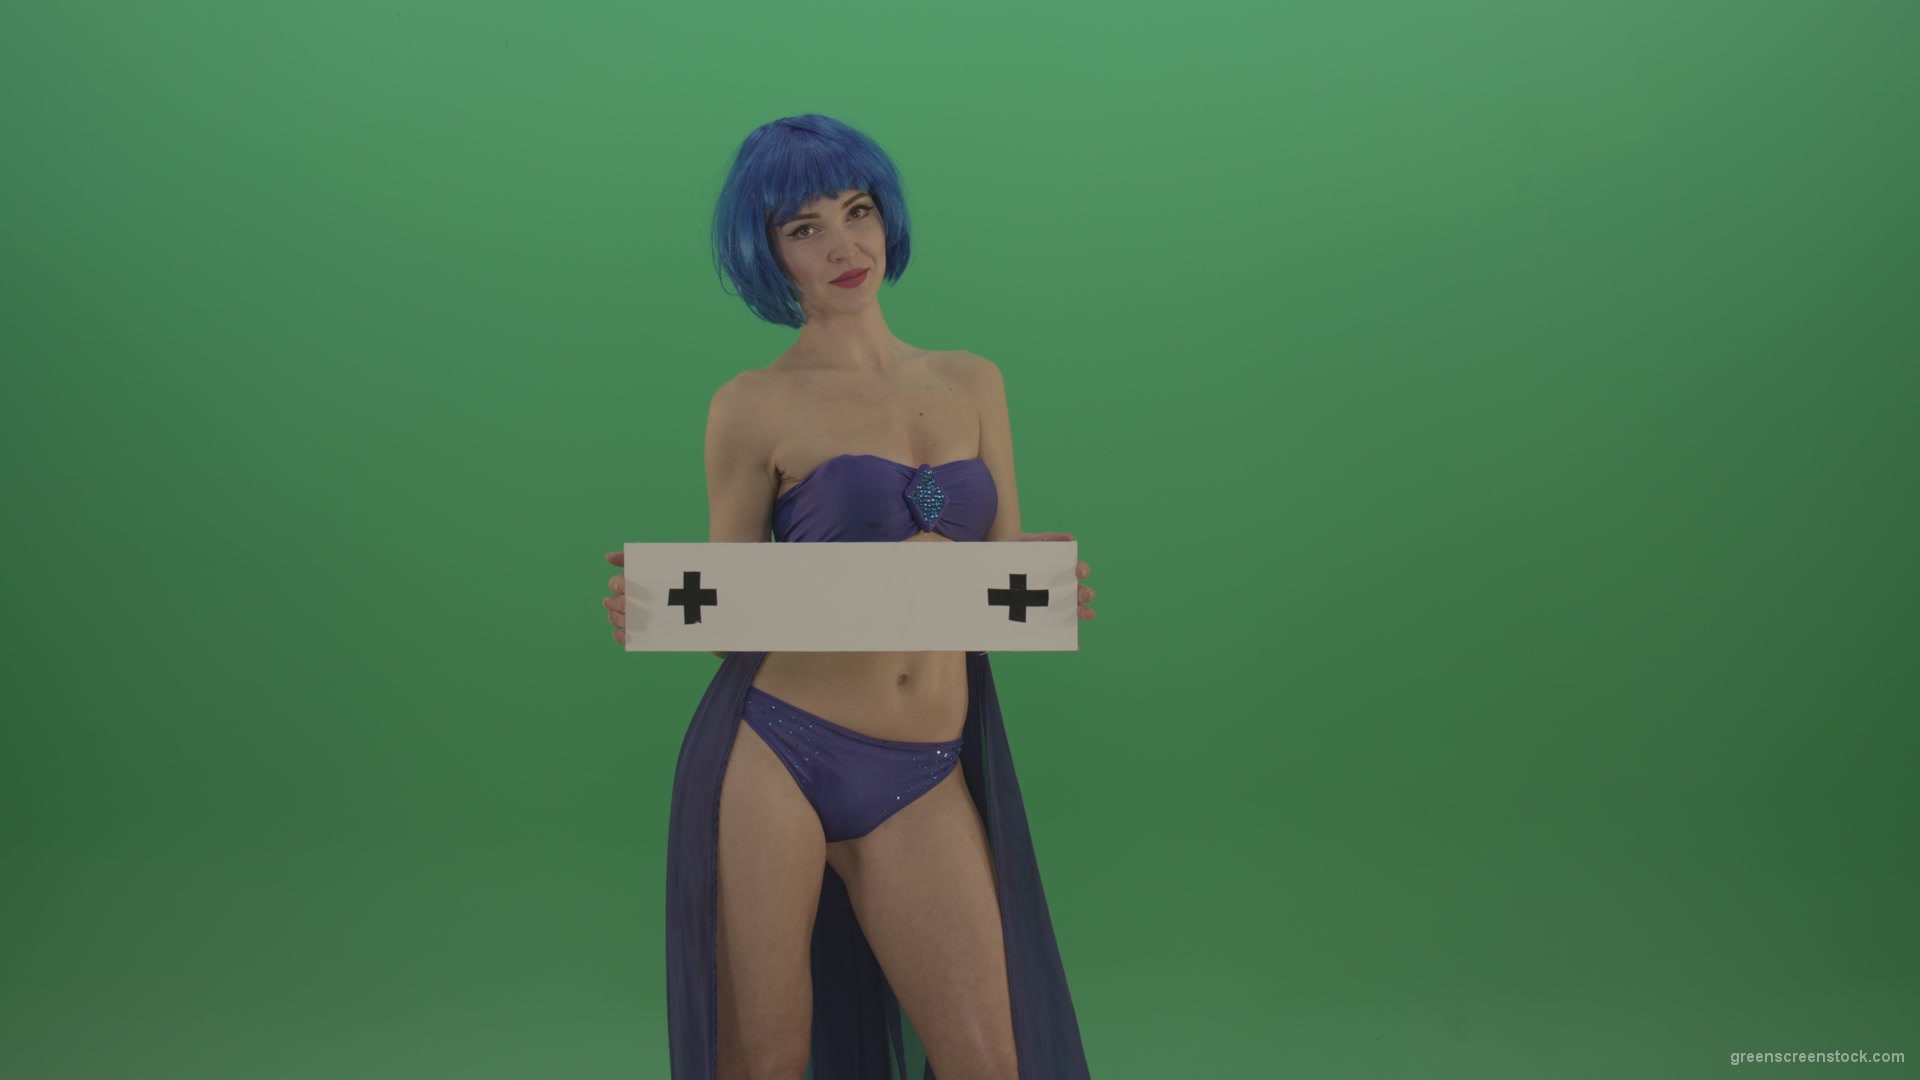 Blue-hair-elegant-naked-girl-posing-with-text-mockup-template-plane-on-green-screen_001 Green Screen Stock